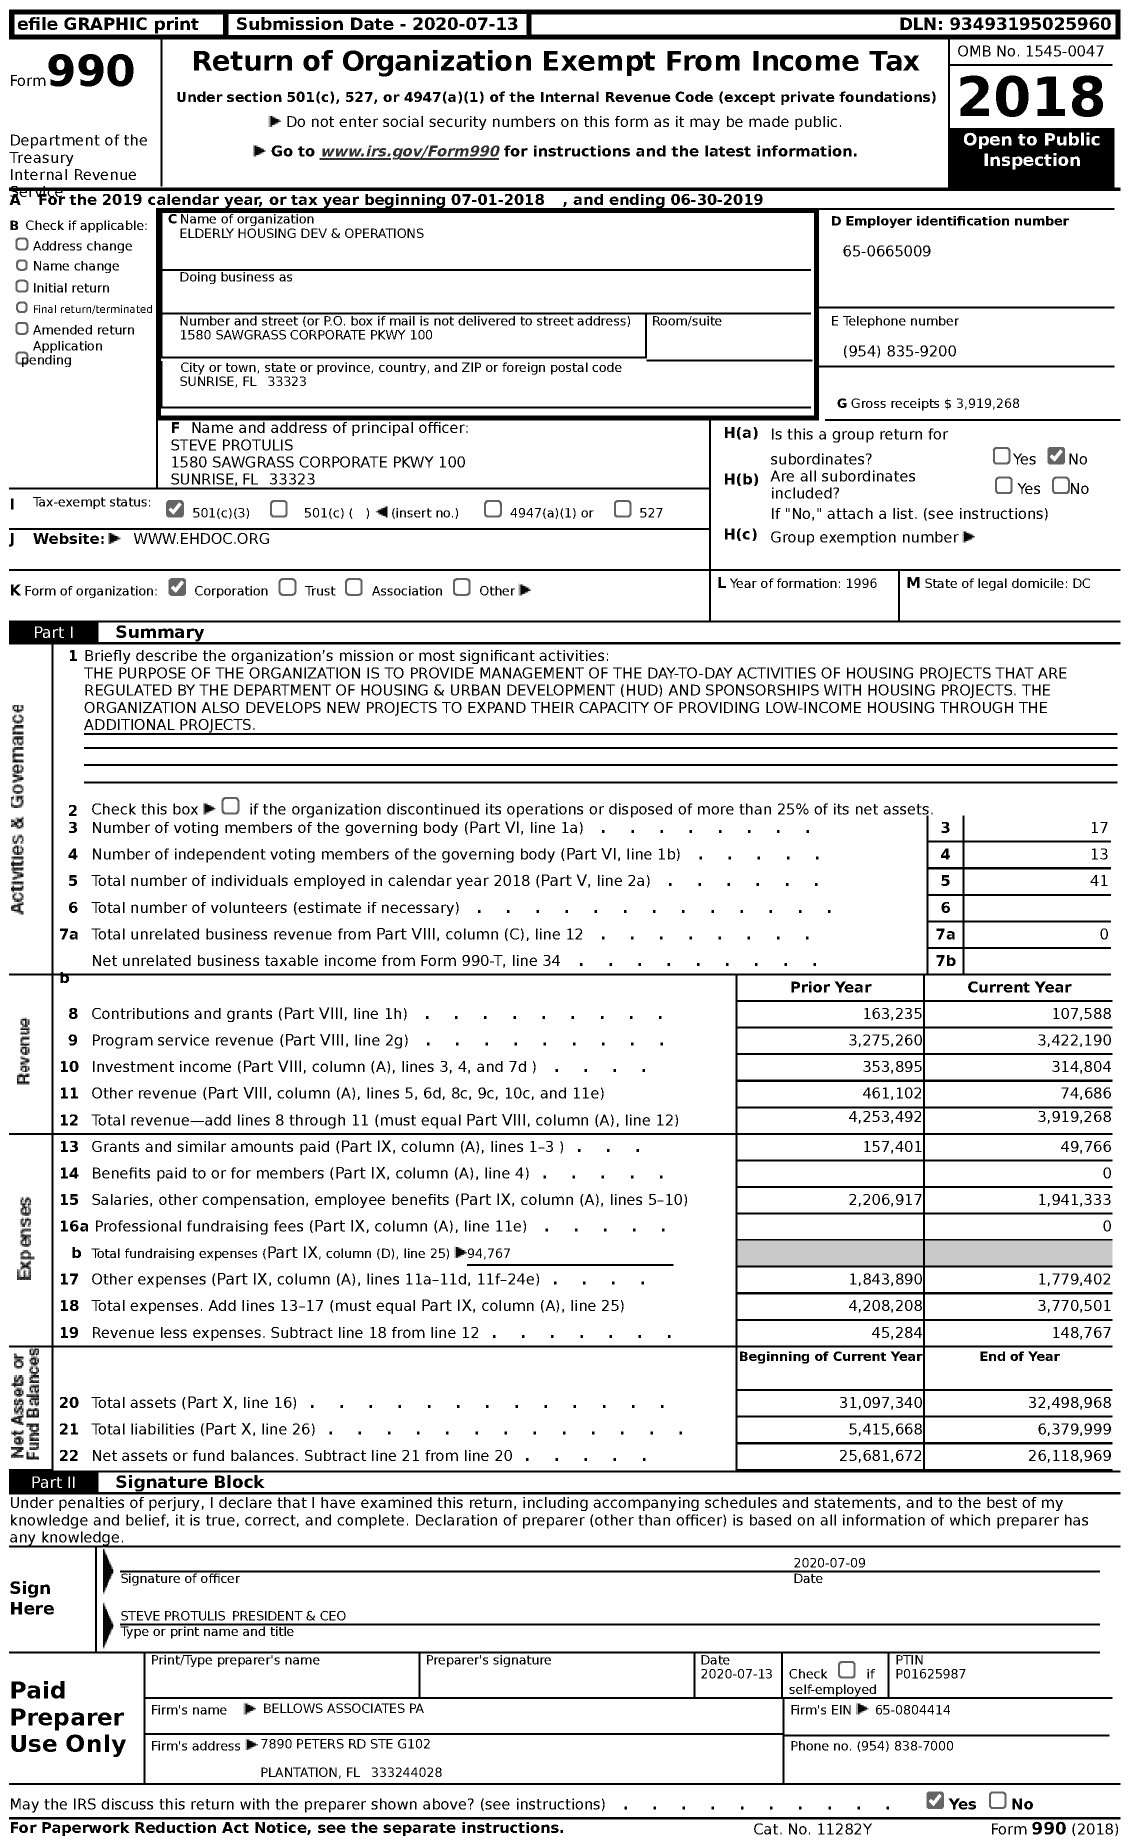 Image of first page of 2018 Form 990 for Elderly Housing Development and Operations Corporation (EHDOC)